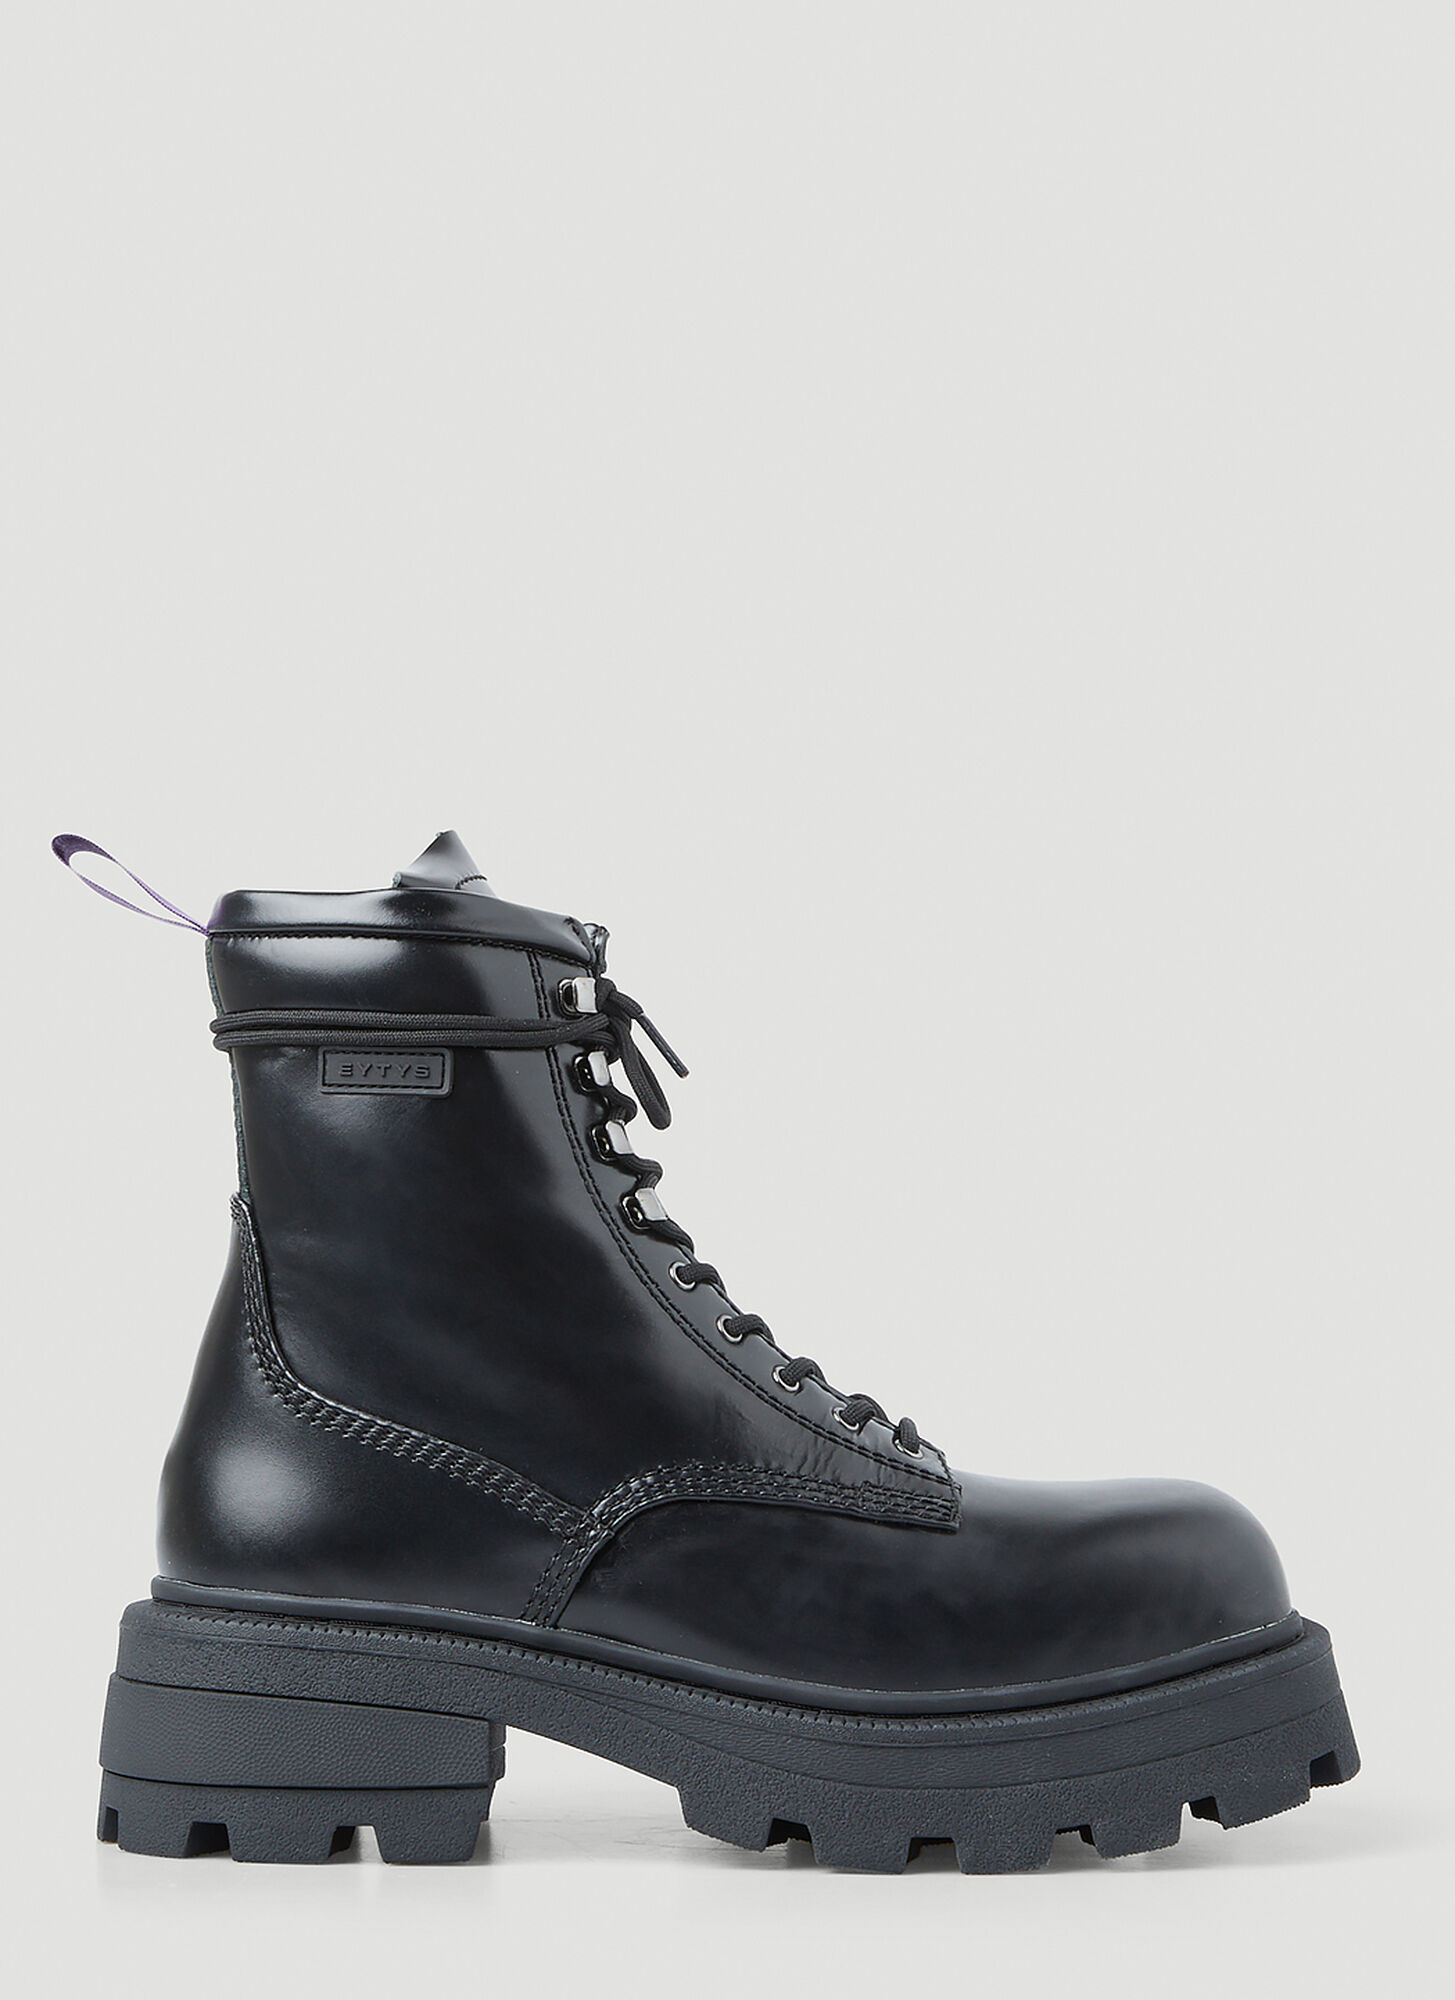 Eytys Michigan Lace Up Boots Unisex Black